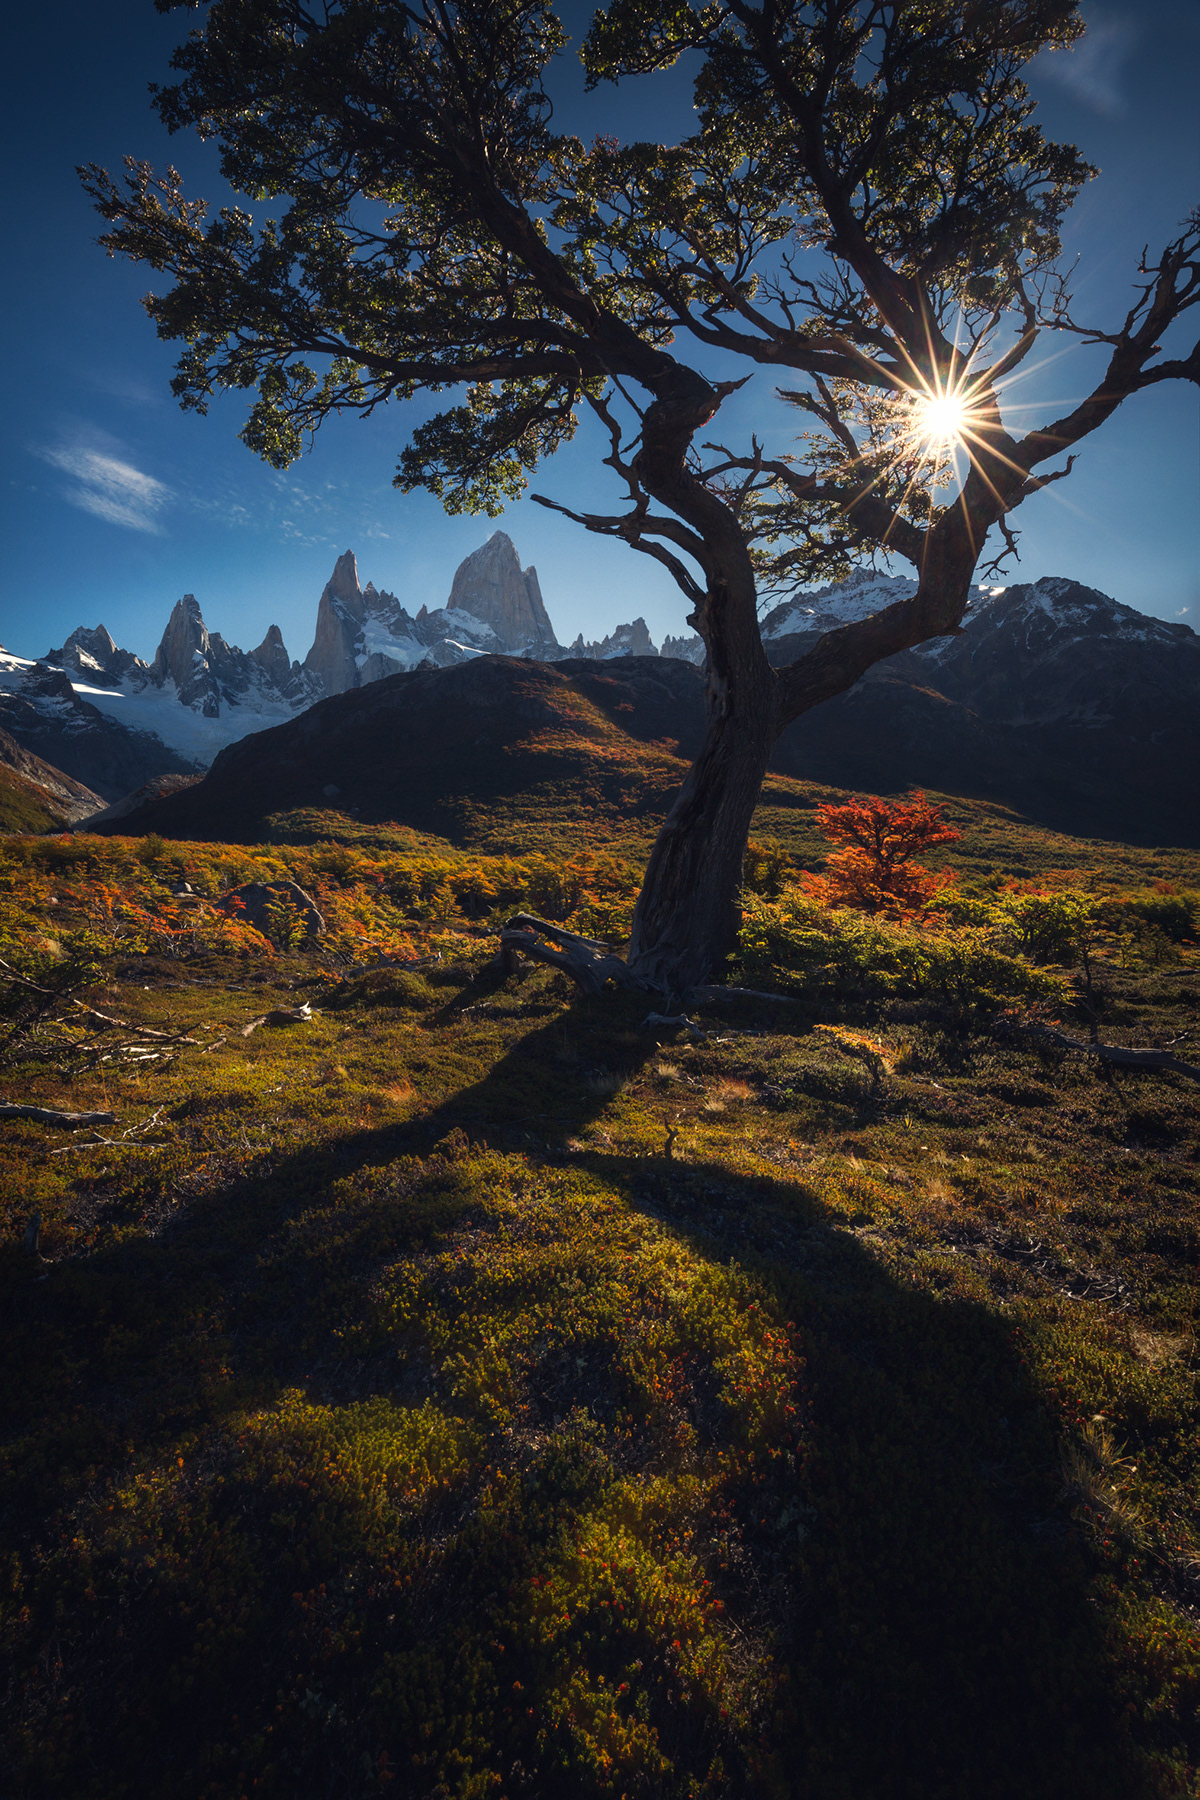 patagonia Mt. Fitz Roy Photography  Nature Landscape autumn trees mountain wilderness marco grassi